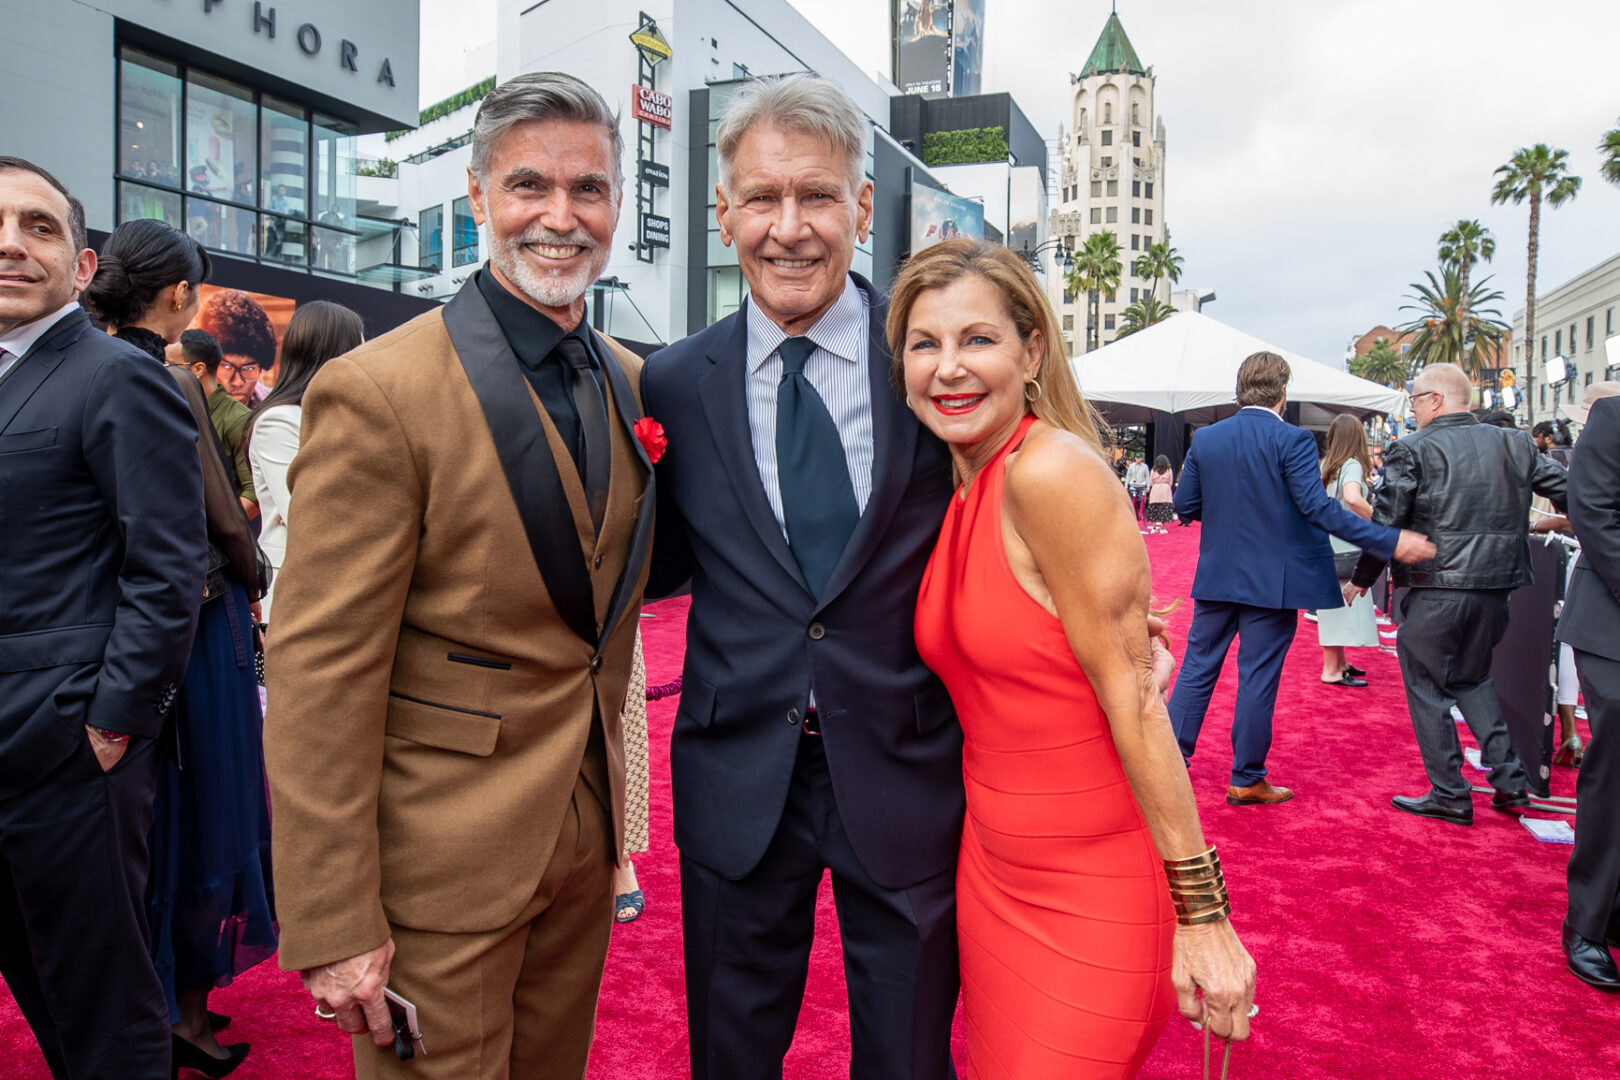 Indiana Jones Epic Stunt Spectacular Cast Members Meet Harrison Ford at ‘Dial of Destiny’ Movie Premiere